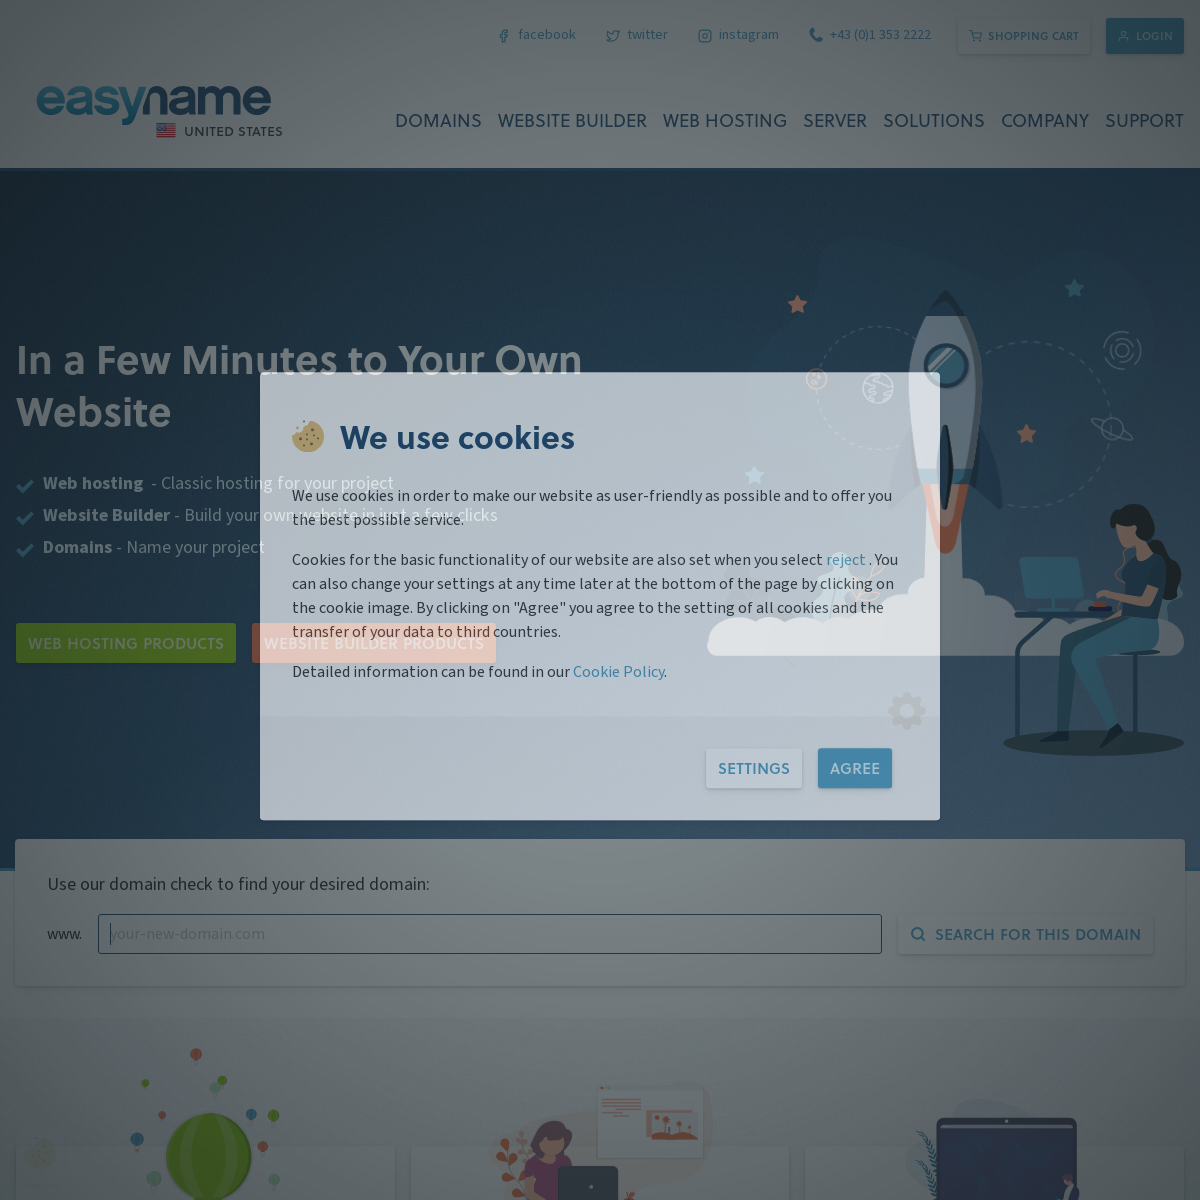 A complete backup of easyname.com